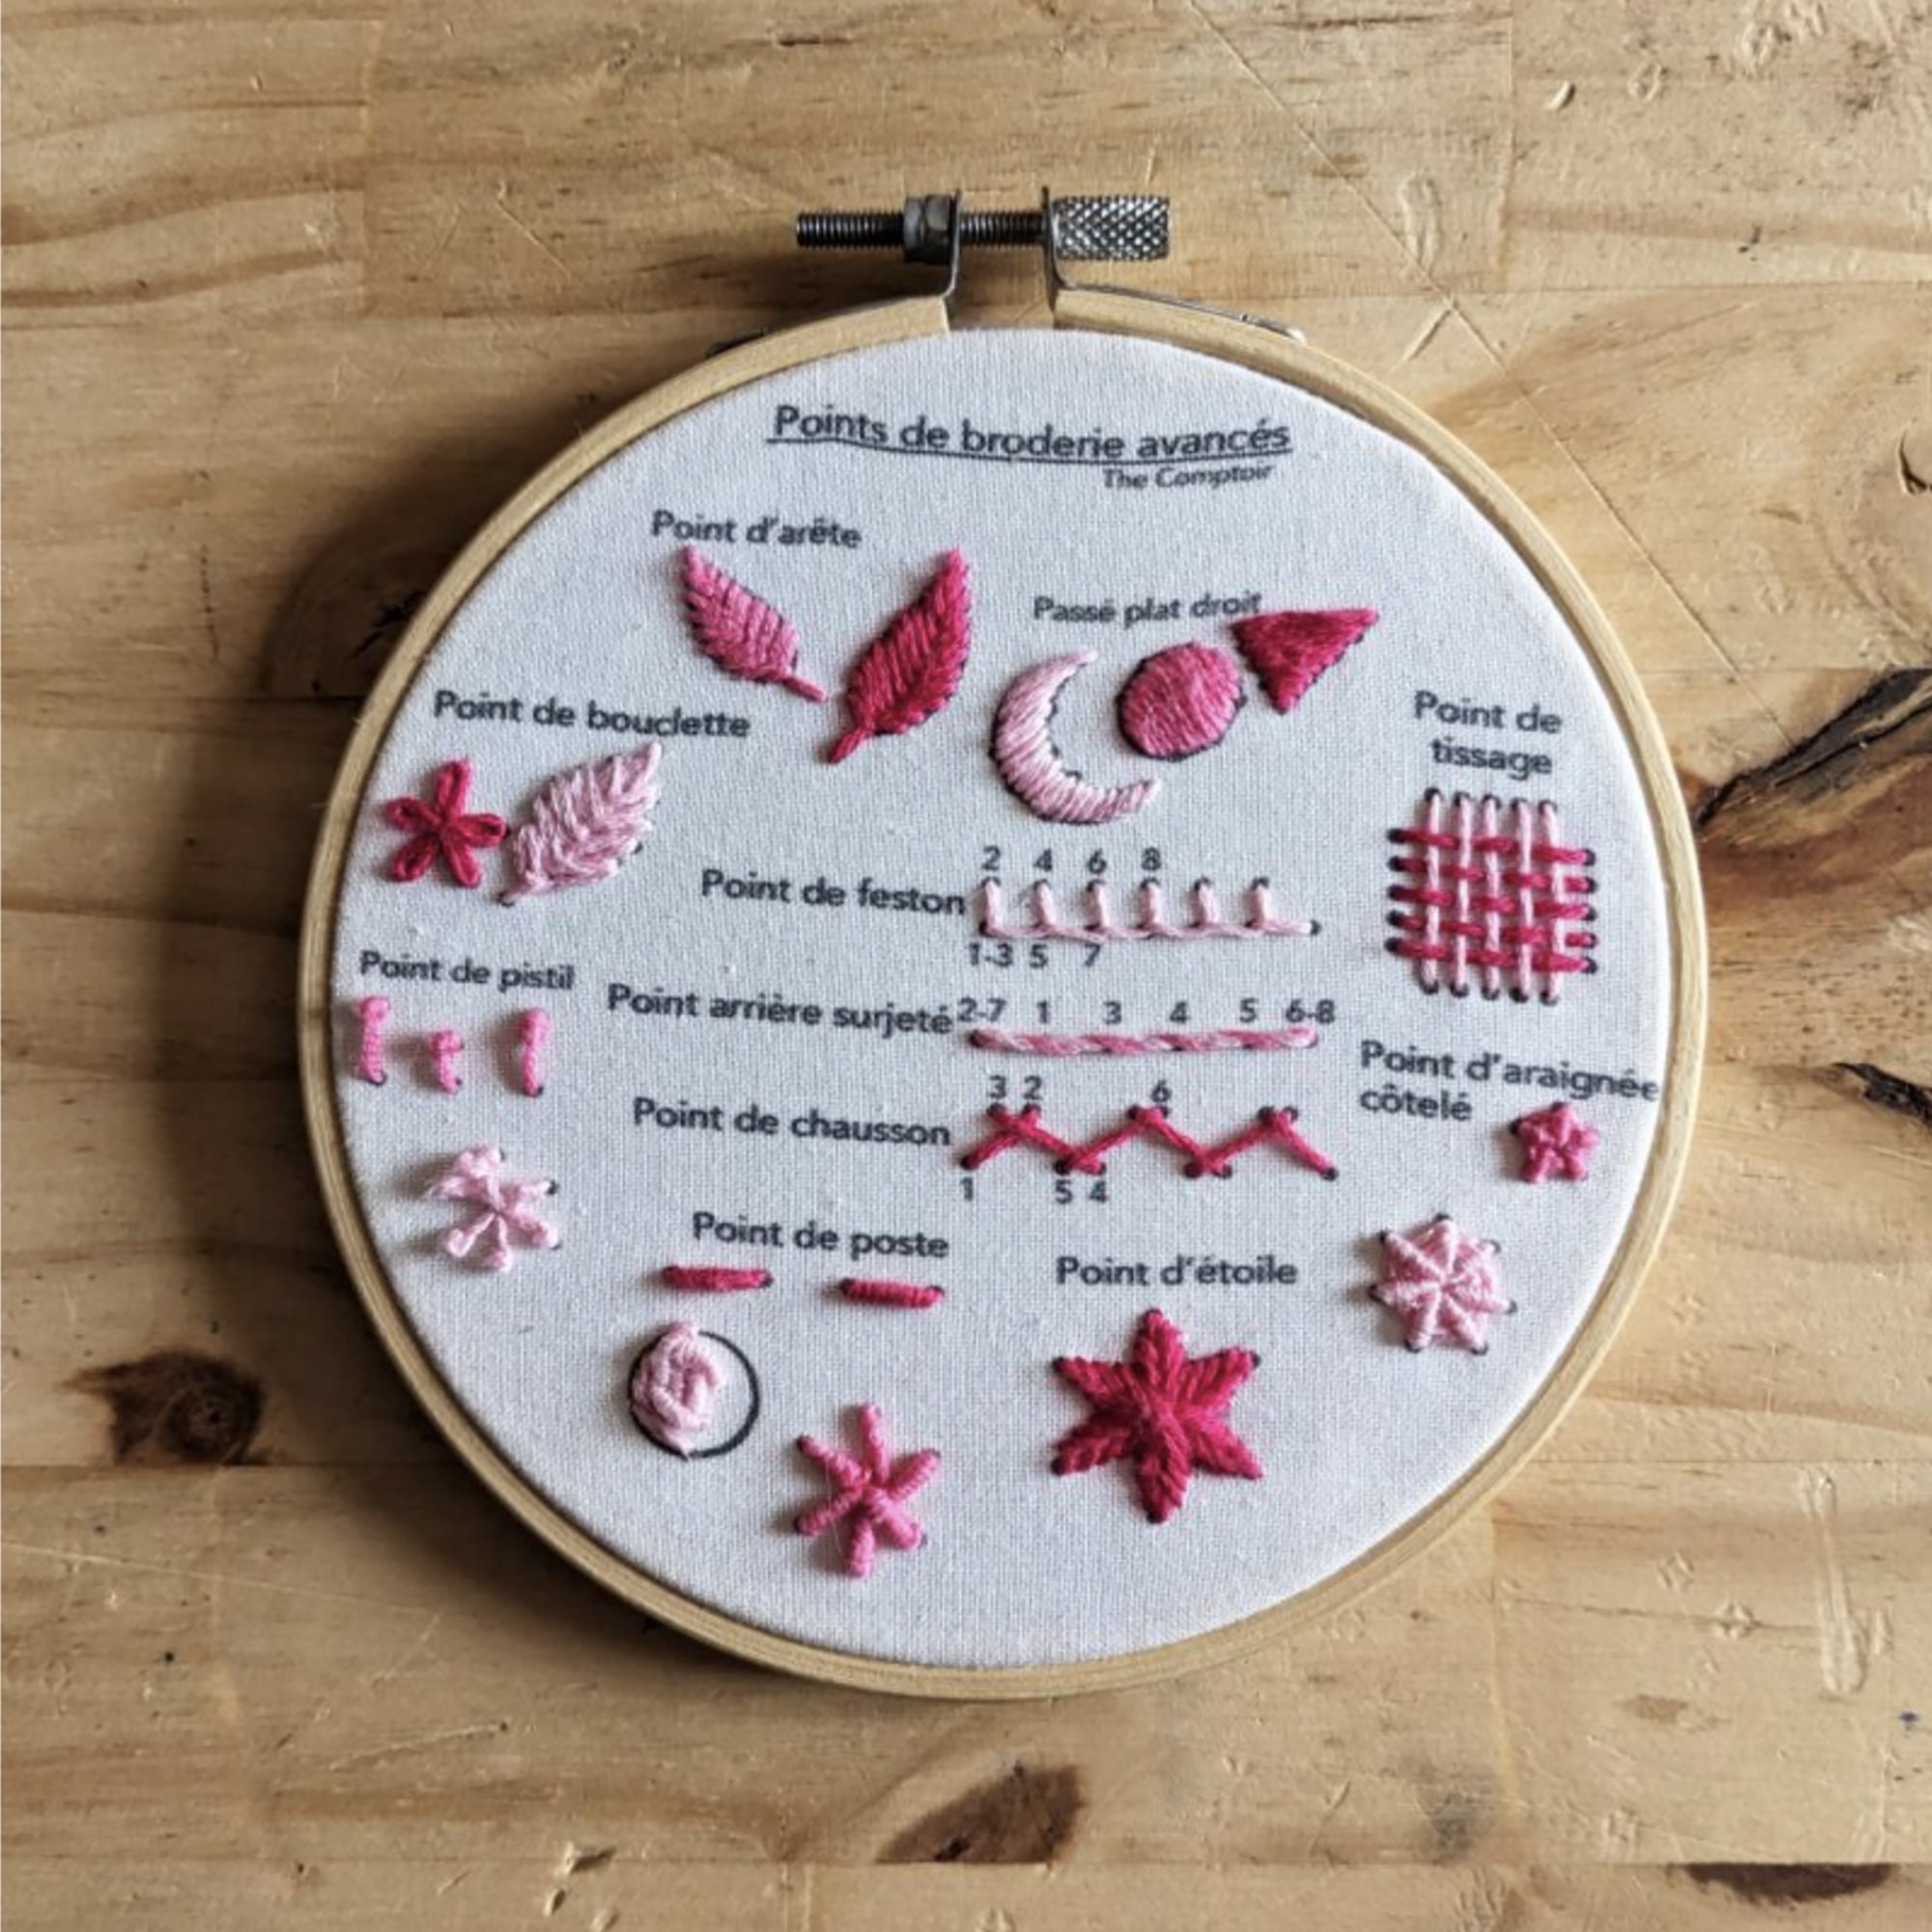 HOURFUN Beginners Embroidery Stitch Practice Kit Includes 3 Embroidery  Start Kits for Practising Different Stitches Patterns and 2 Advanced Cross